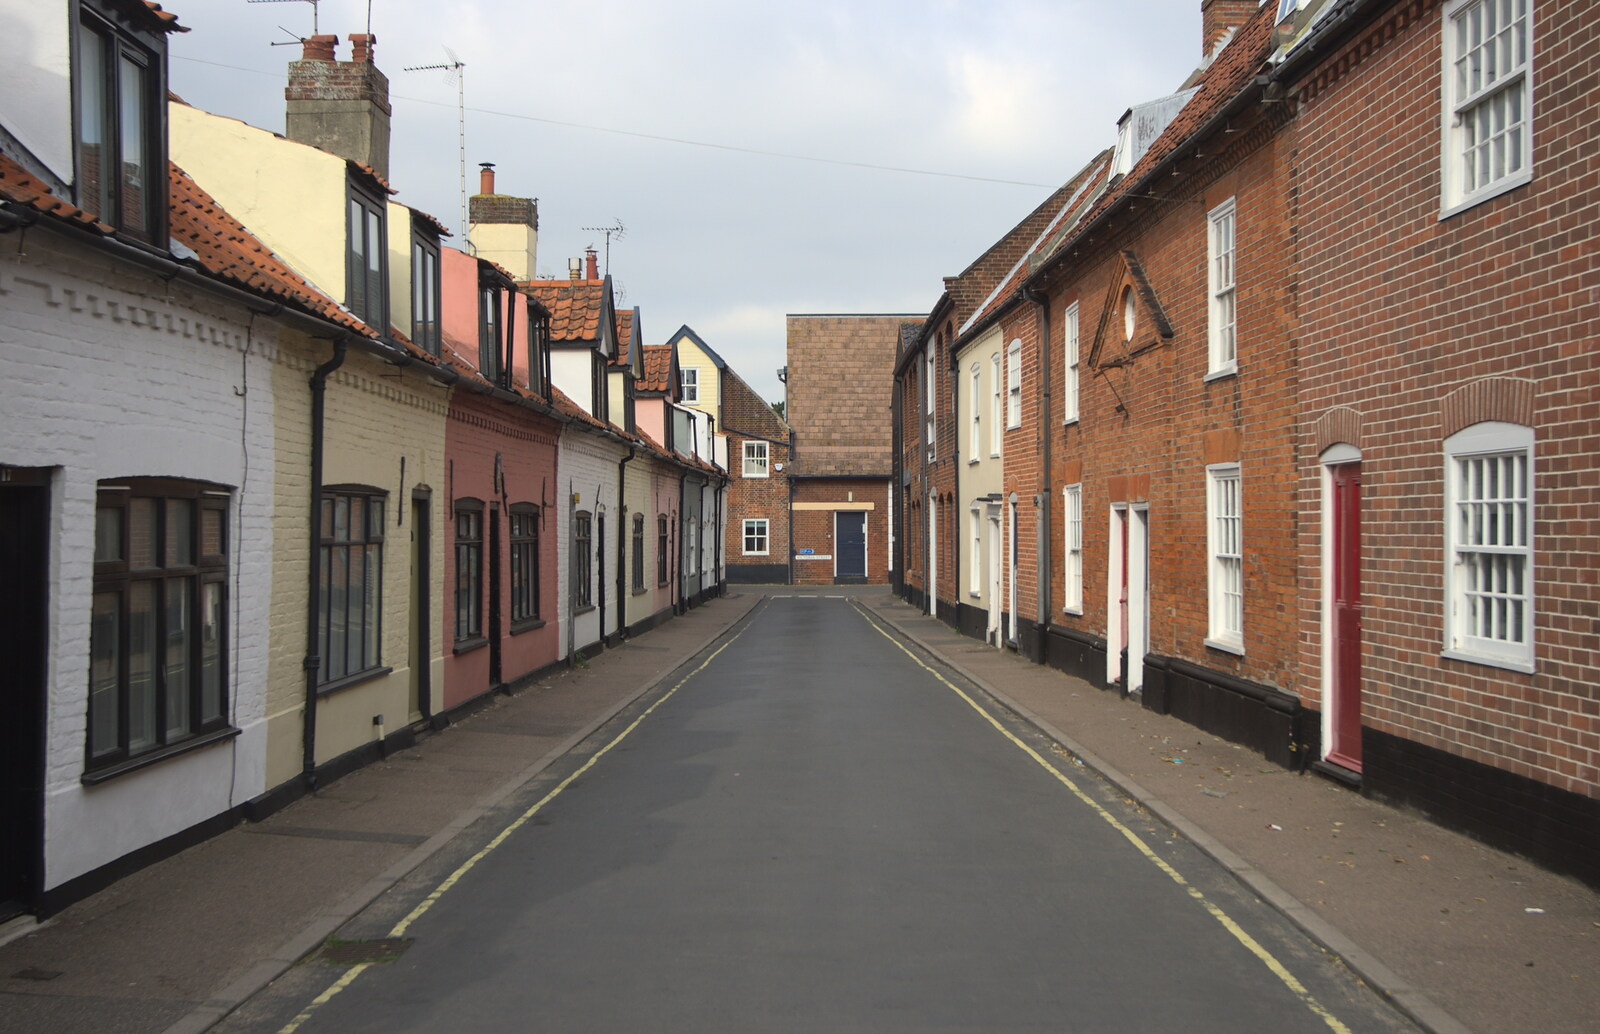 The 'Adnams Street' from Southwold By The Sea, Suffolk - 29th September 2013